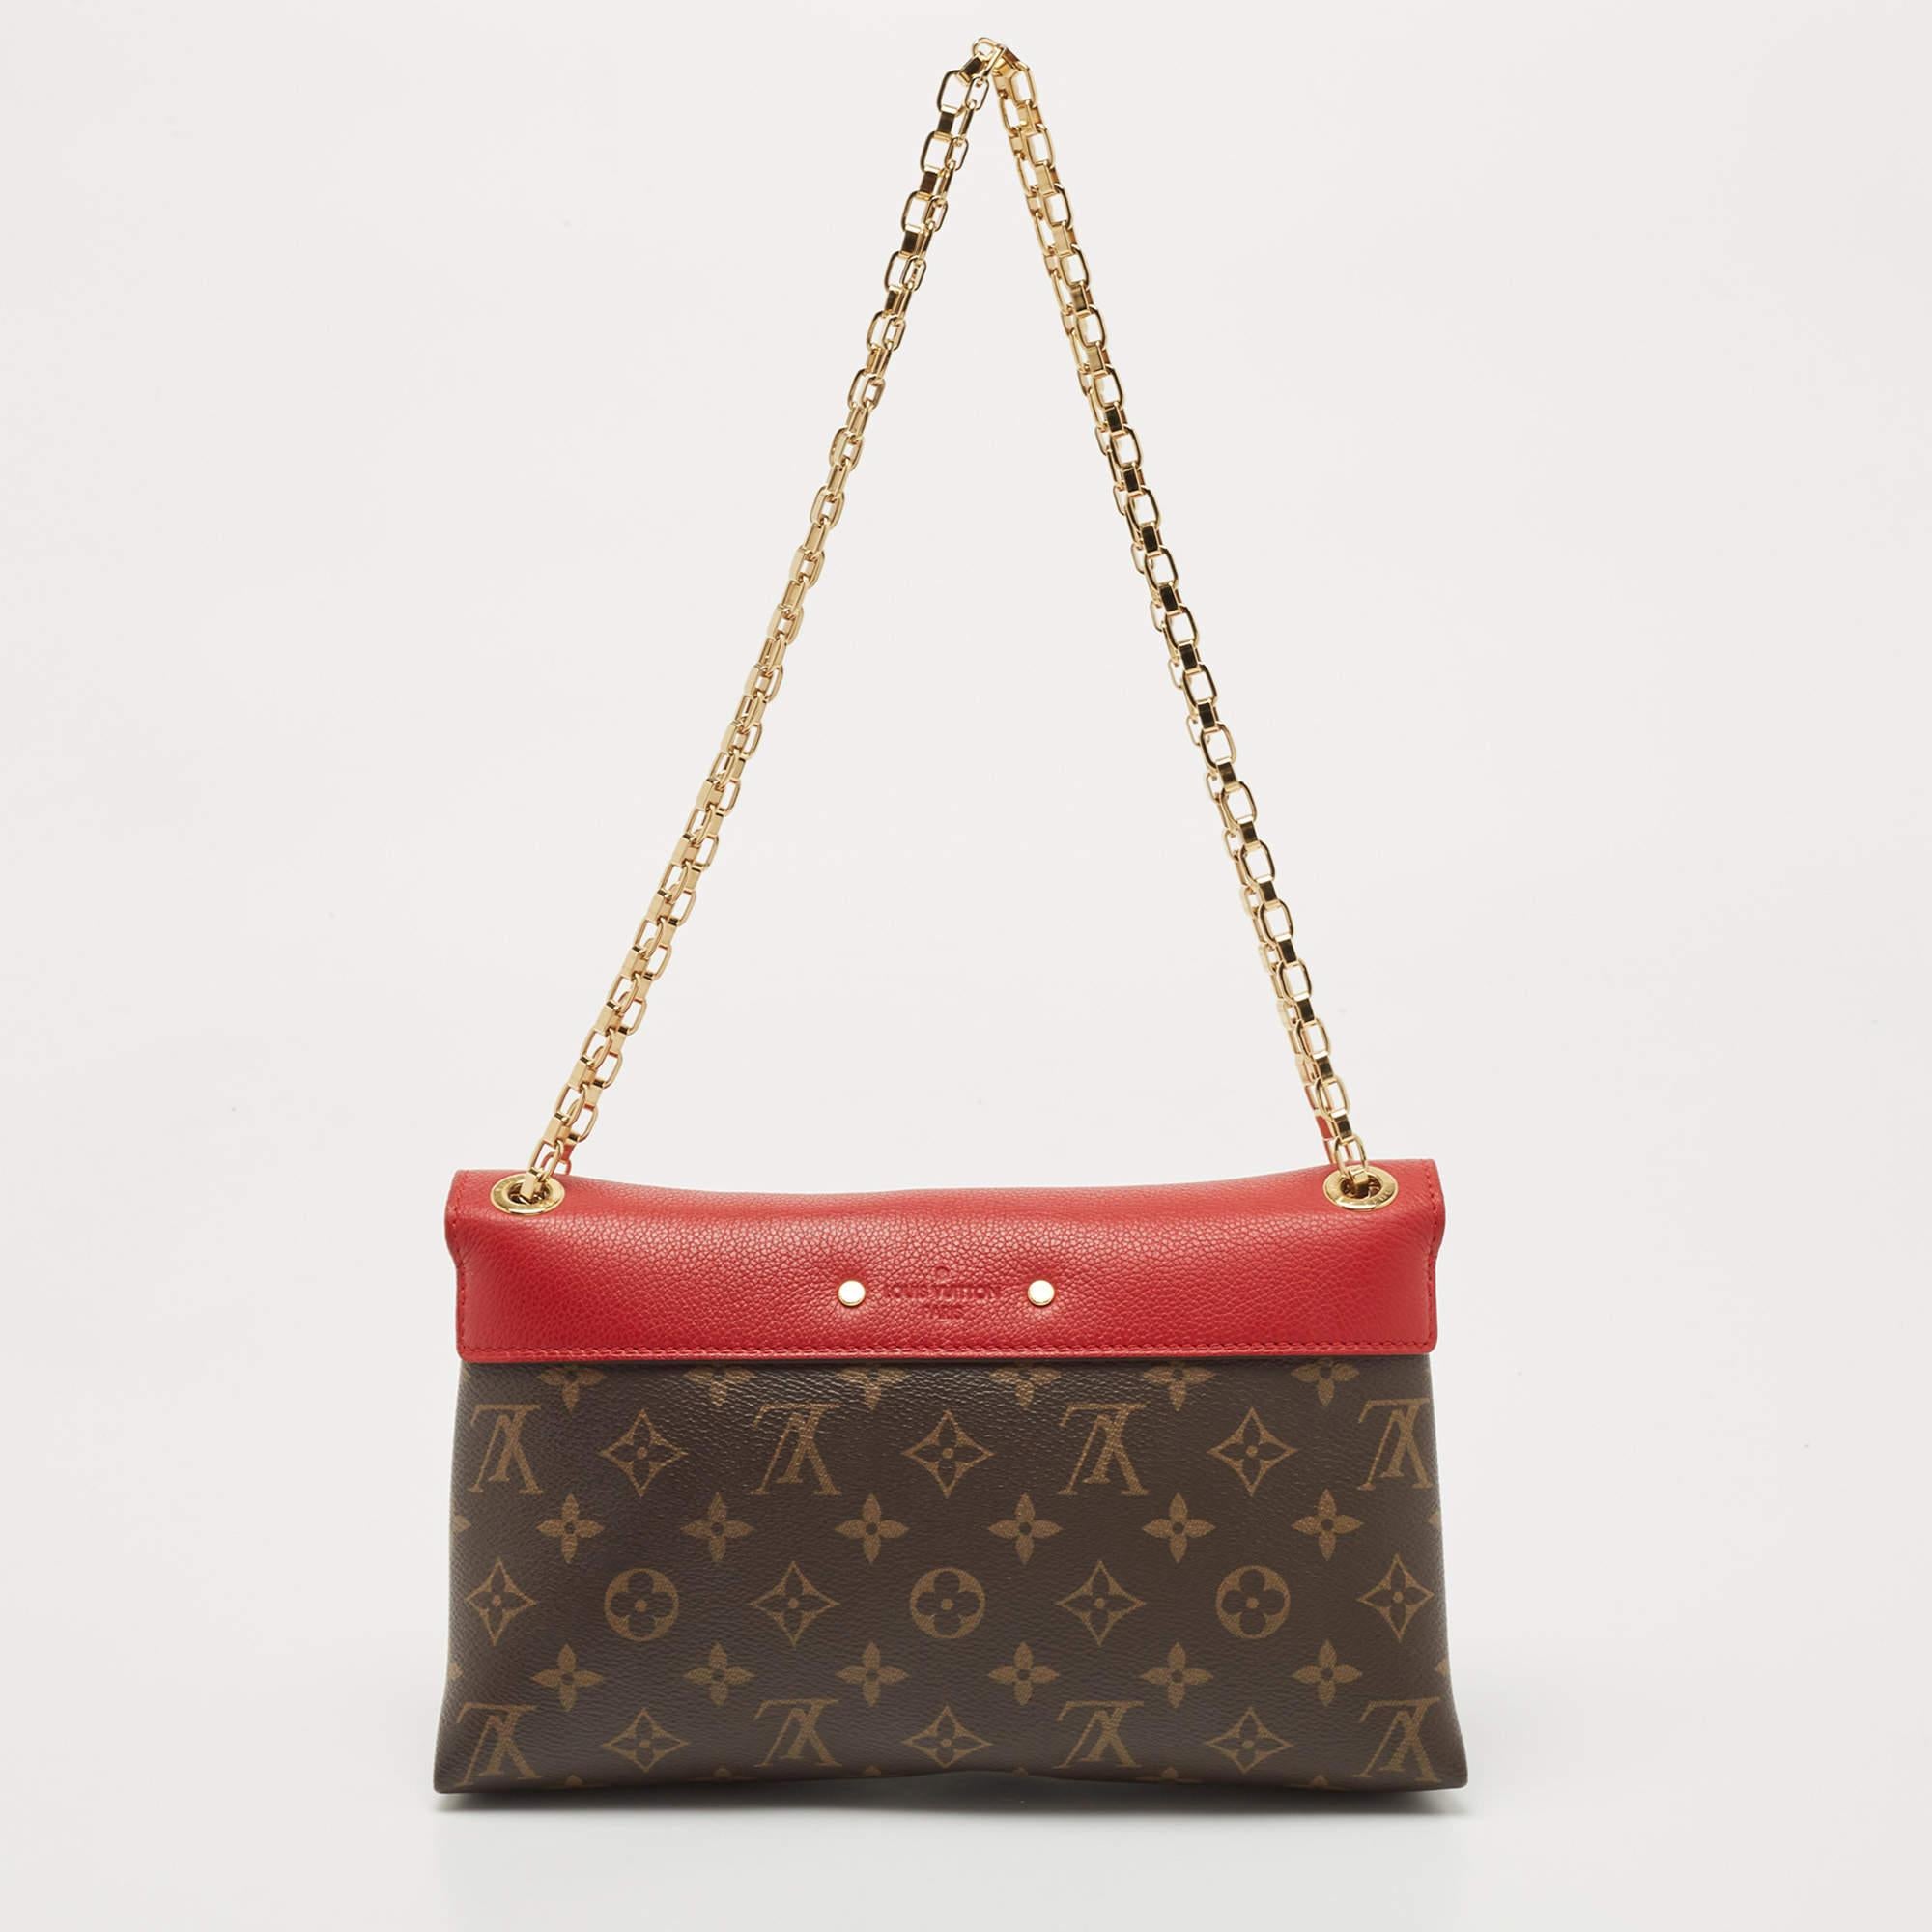 The classy silhouette and the use of Monogram canvas and leather for the exterior bring out the appeal of this Louis Vuitton shoulder bag. It features a sliding chain handle, gold-tone hardware, and an Alcantara-lined interior.

